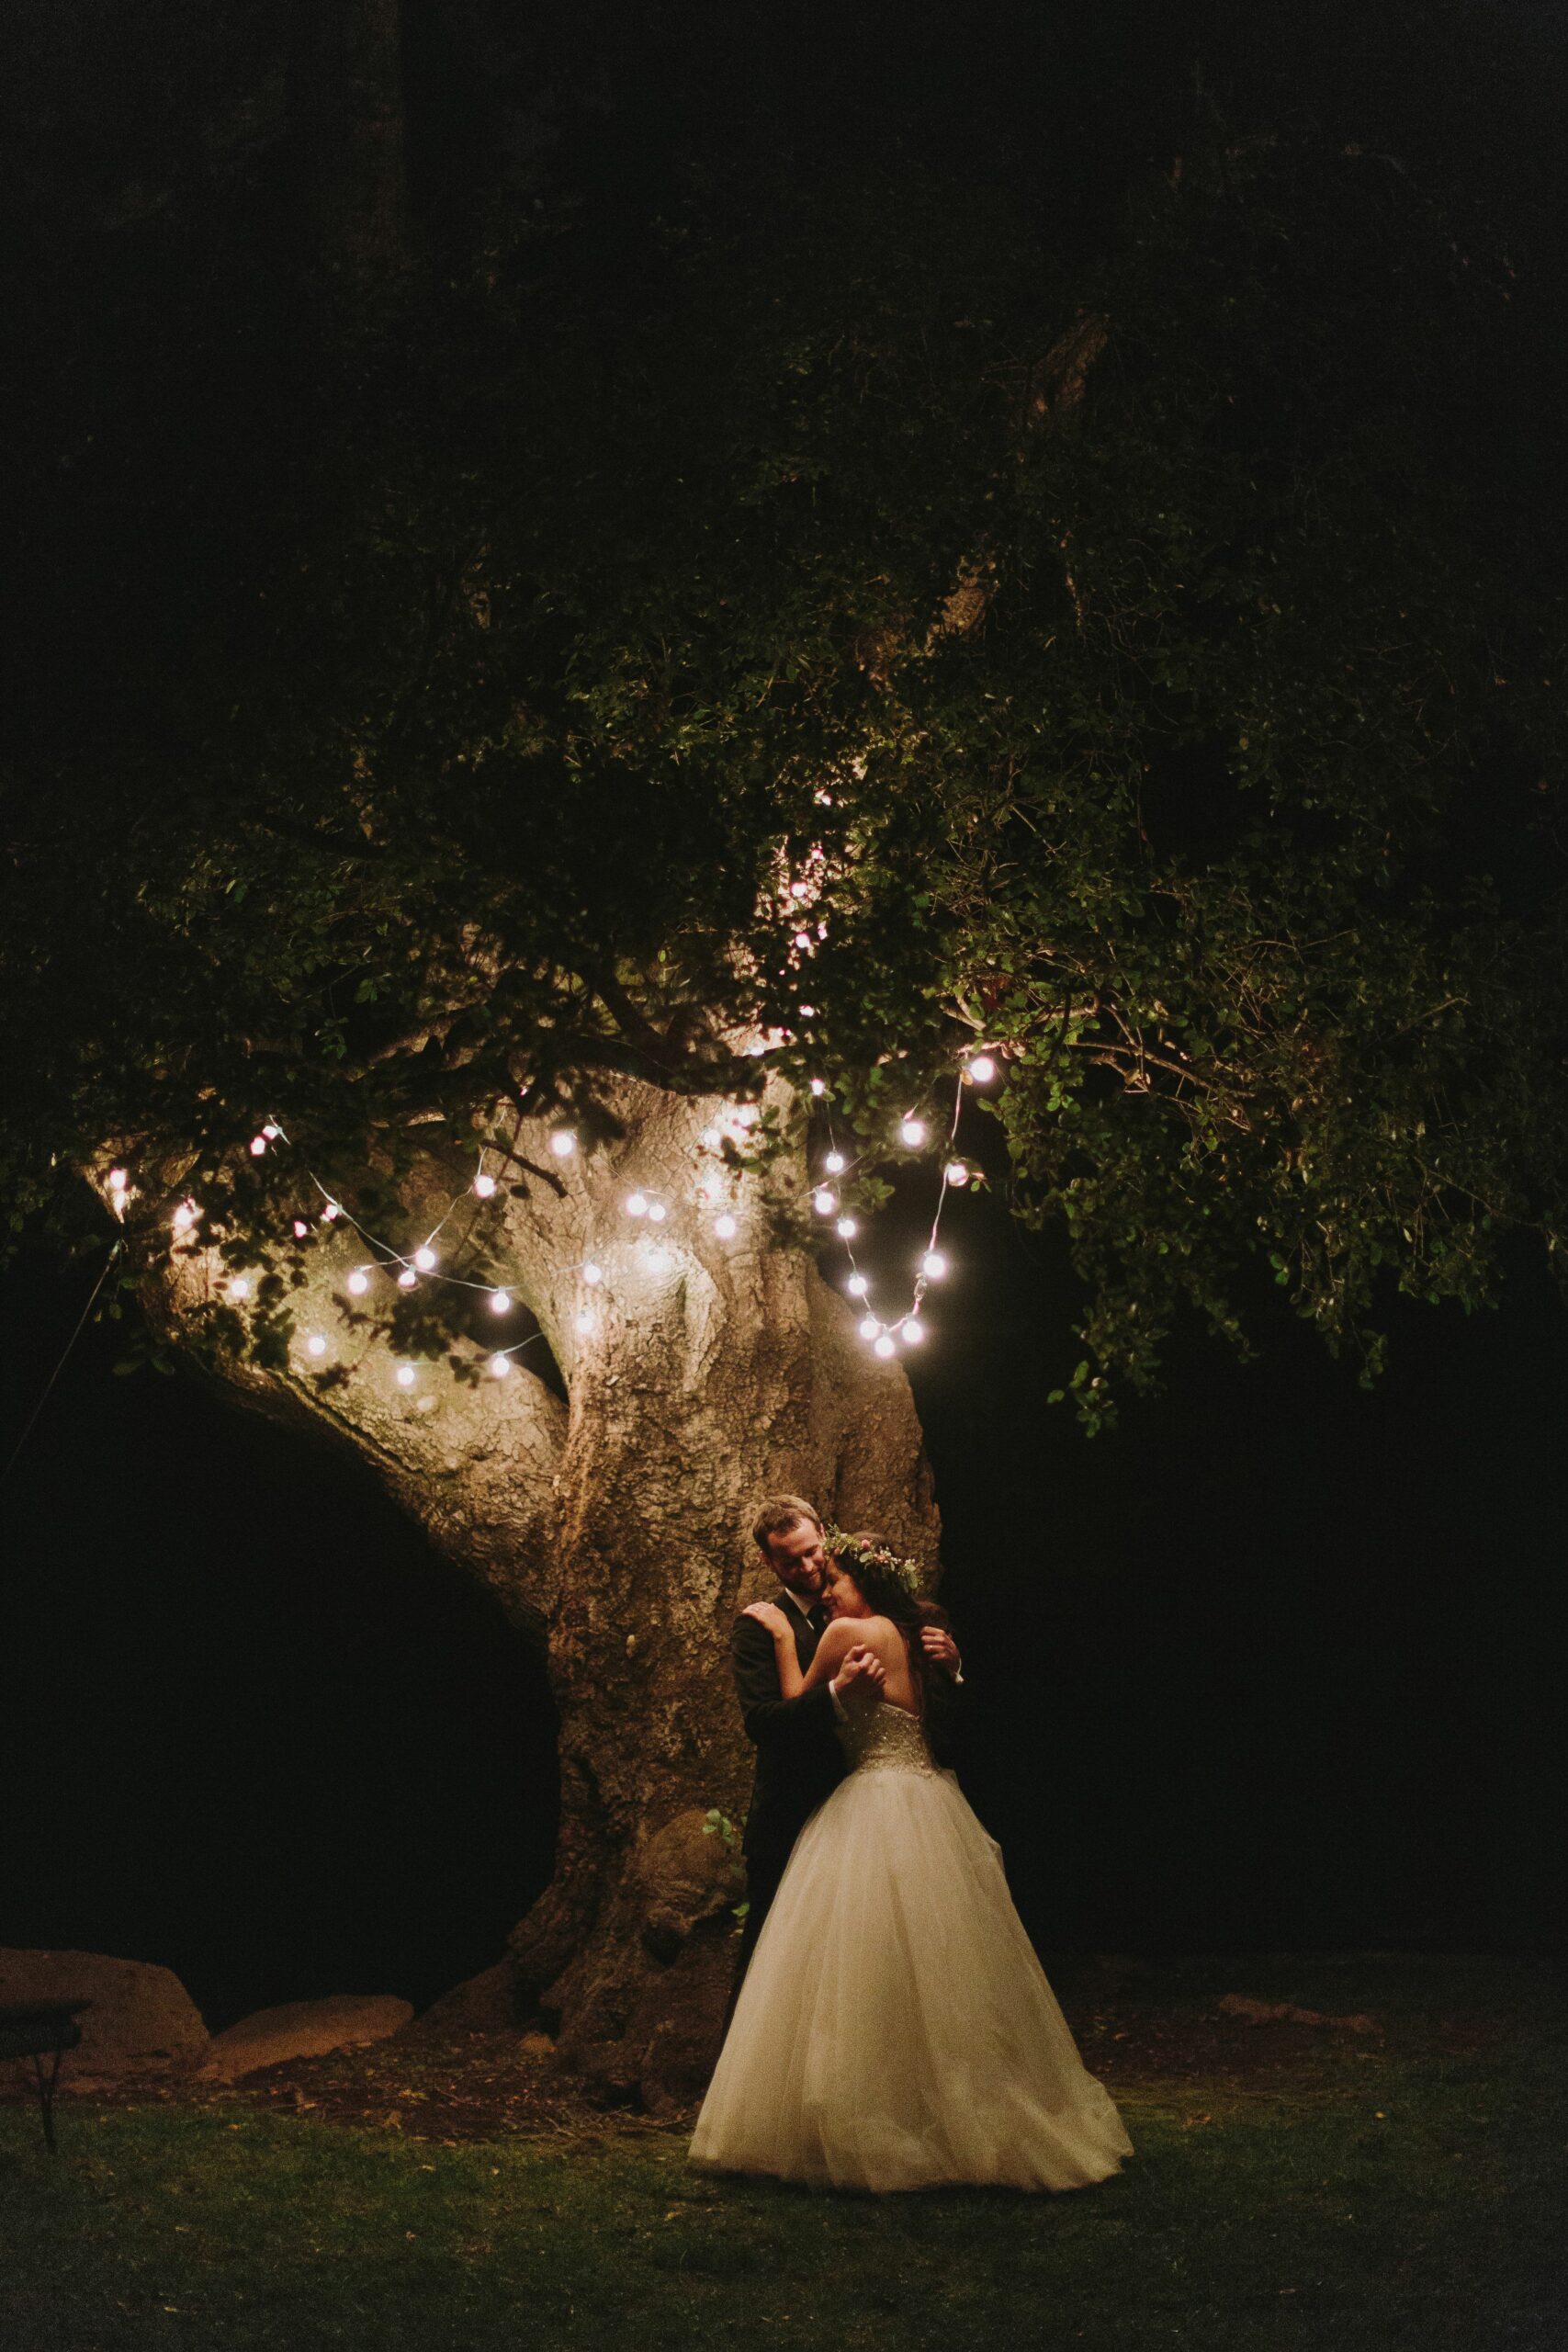 28 Fairytale Wedding Photos That Capture The Magic Of Love | HuffPost